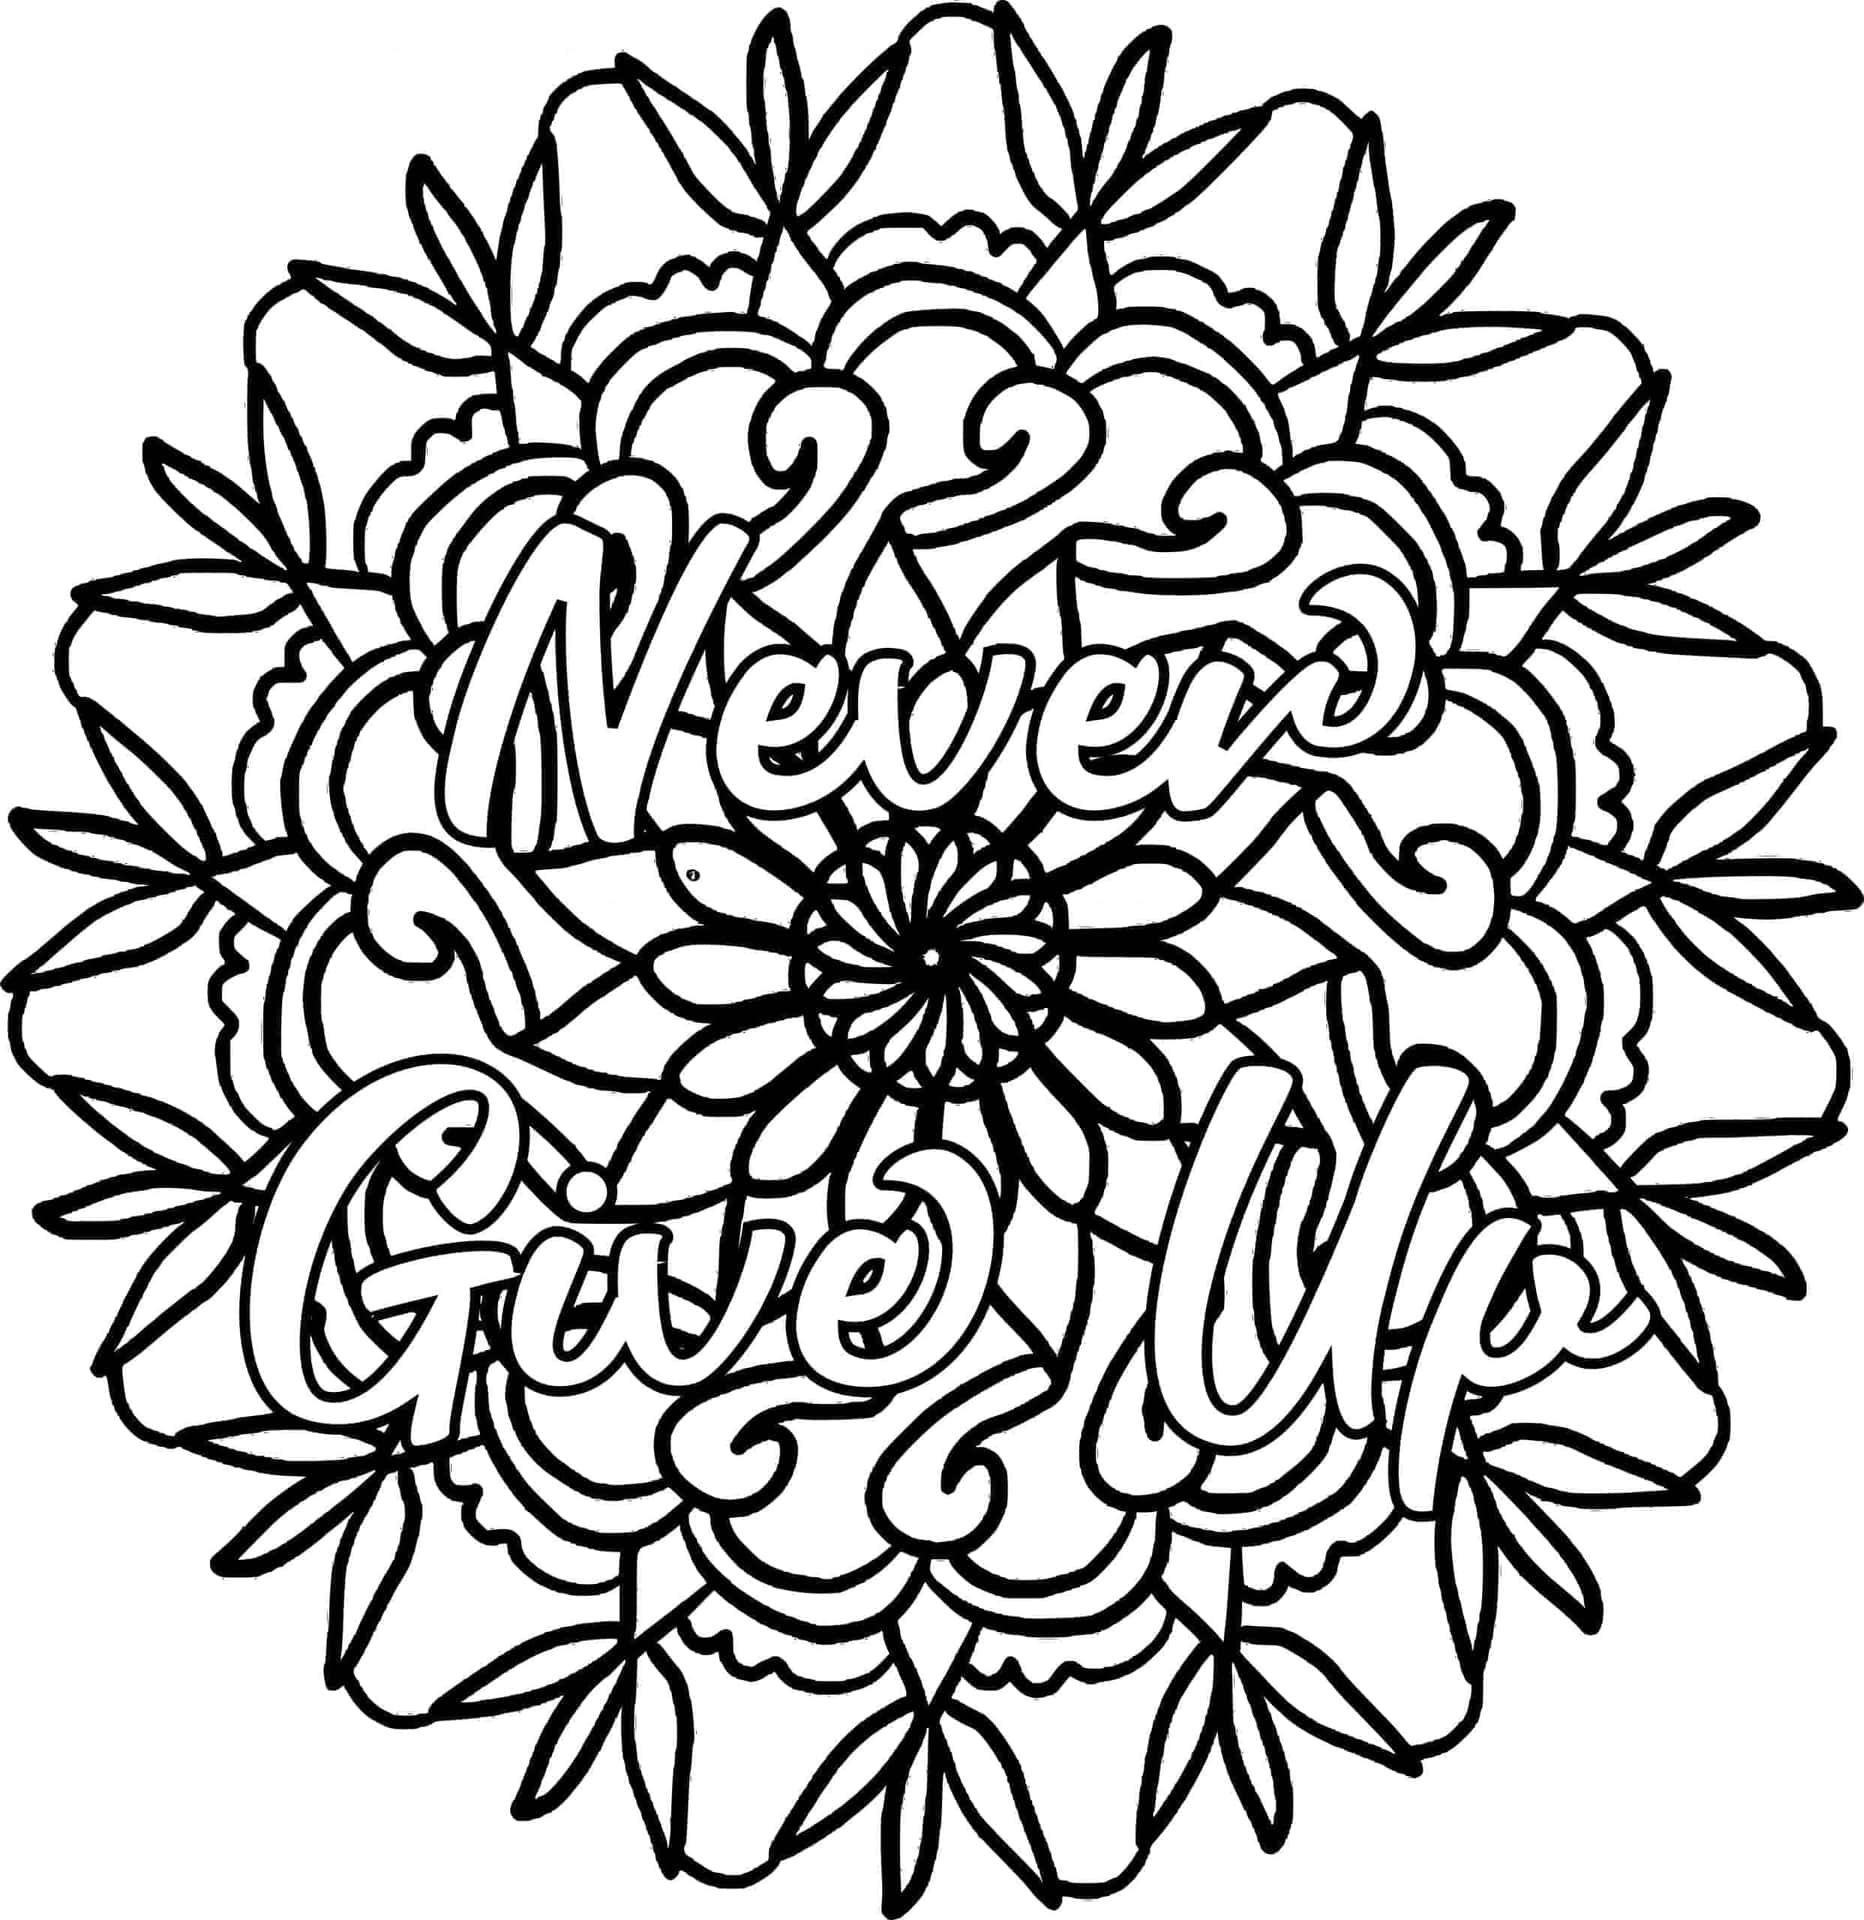 Enjoy these beautiful flower coloring pictures